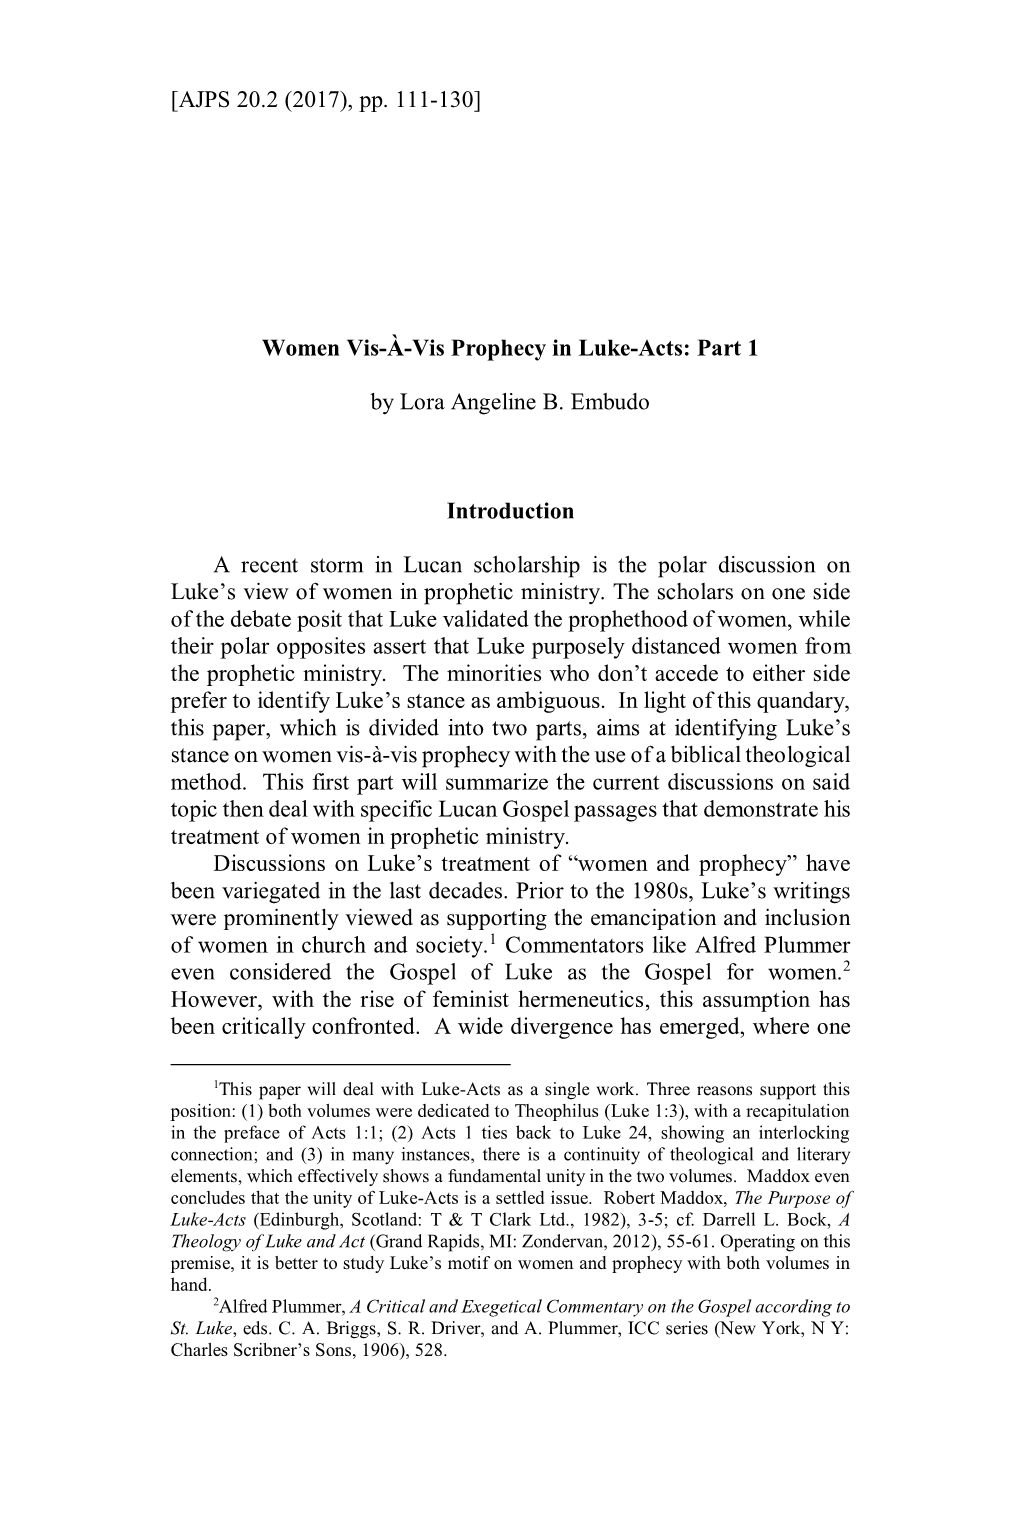 [AJPS 20.2 (2017), Pp. 111-130] Women Vis-À-Vis Prophecy in Luke-Acts: Part 1 by Lora Angeline B. Embudo Introduction a Recent